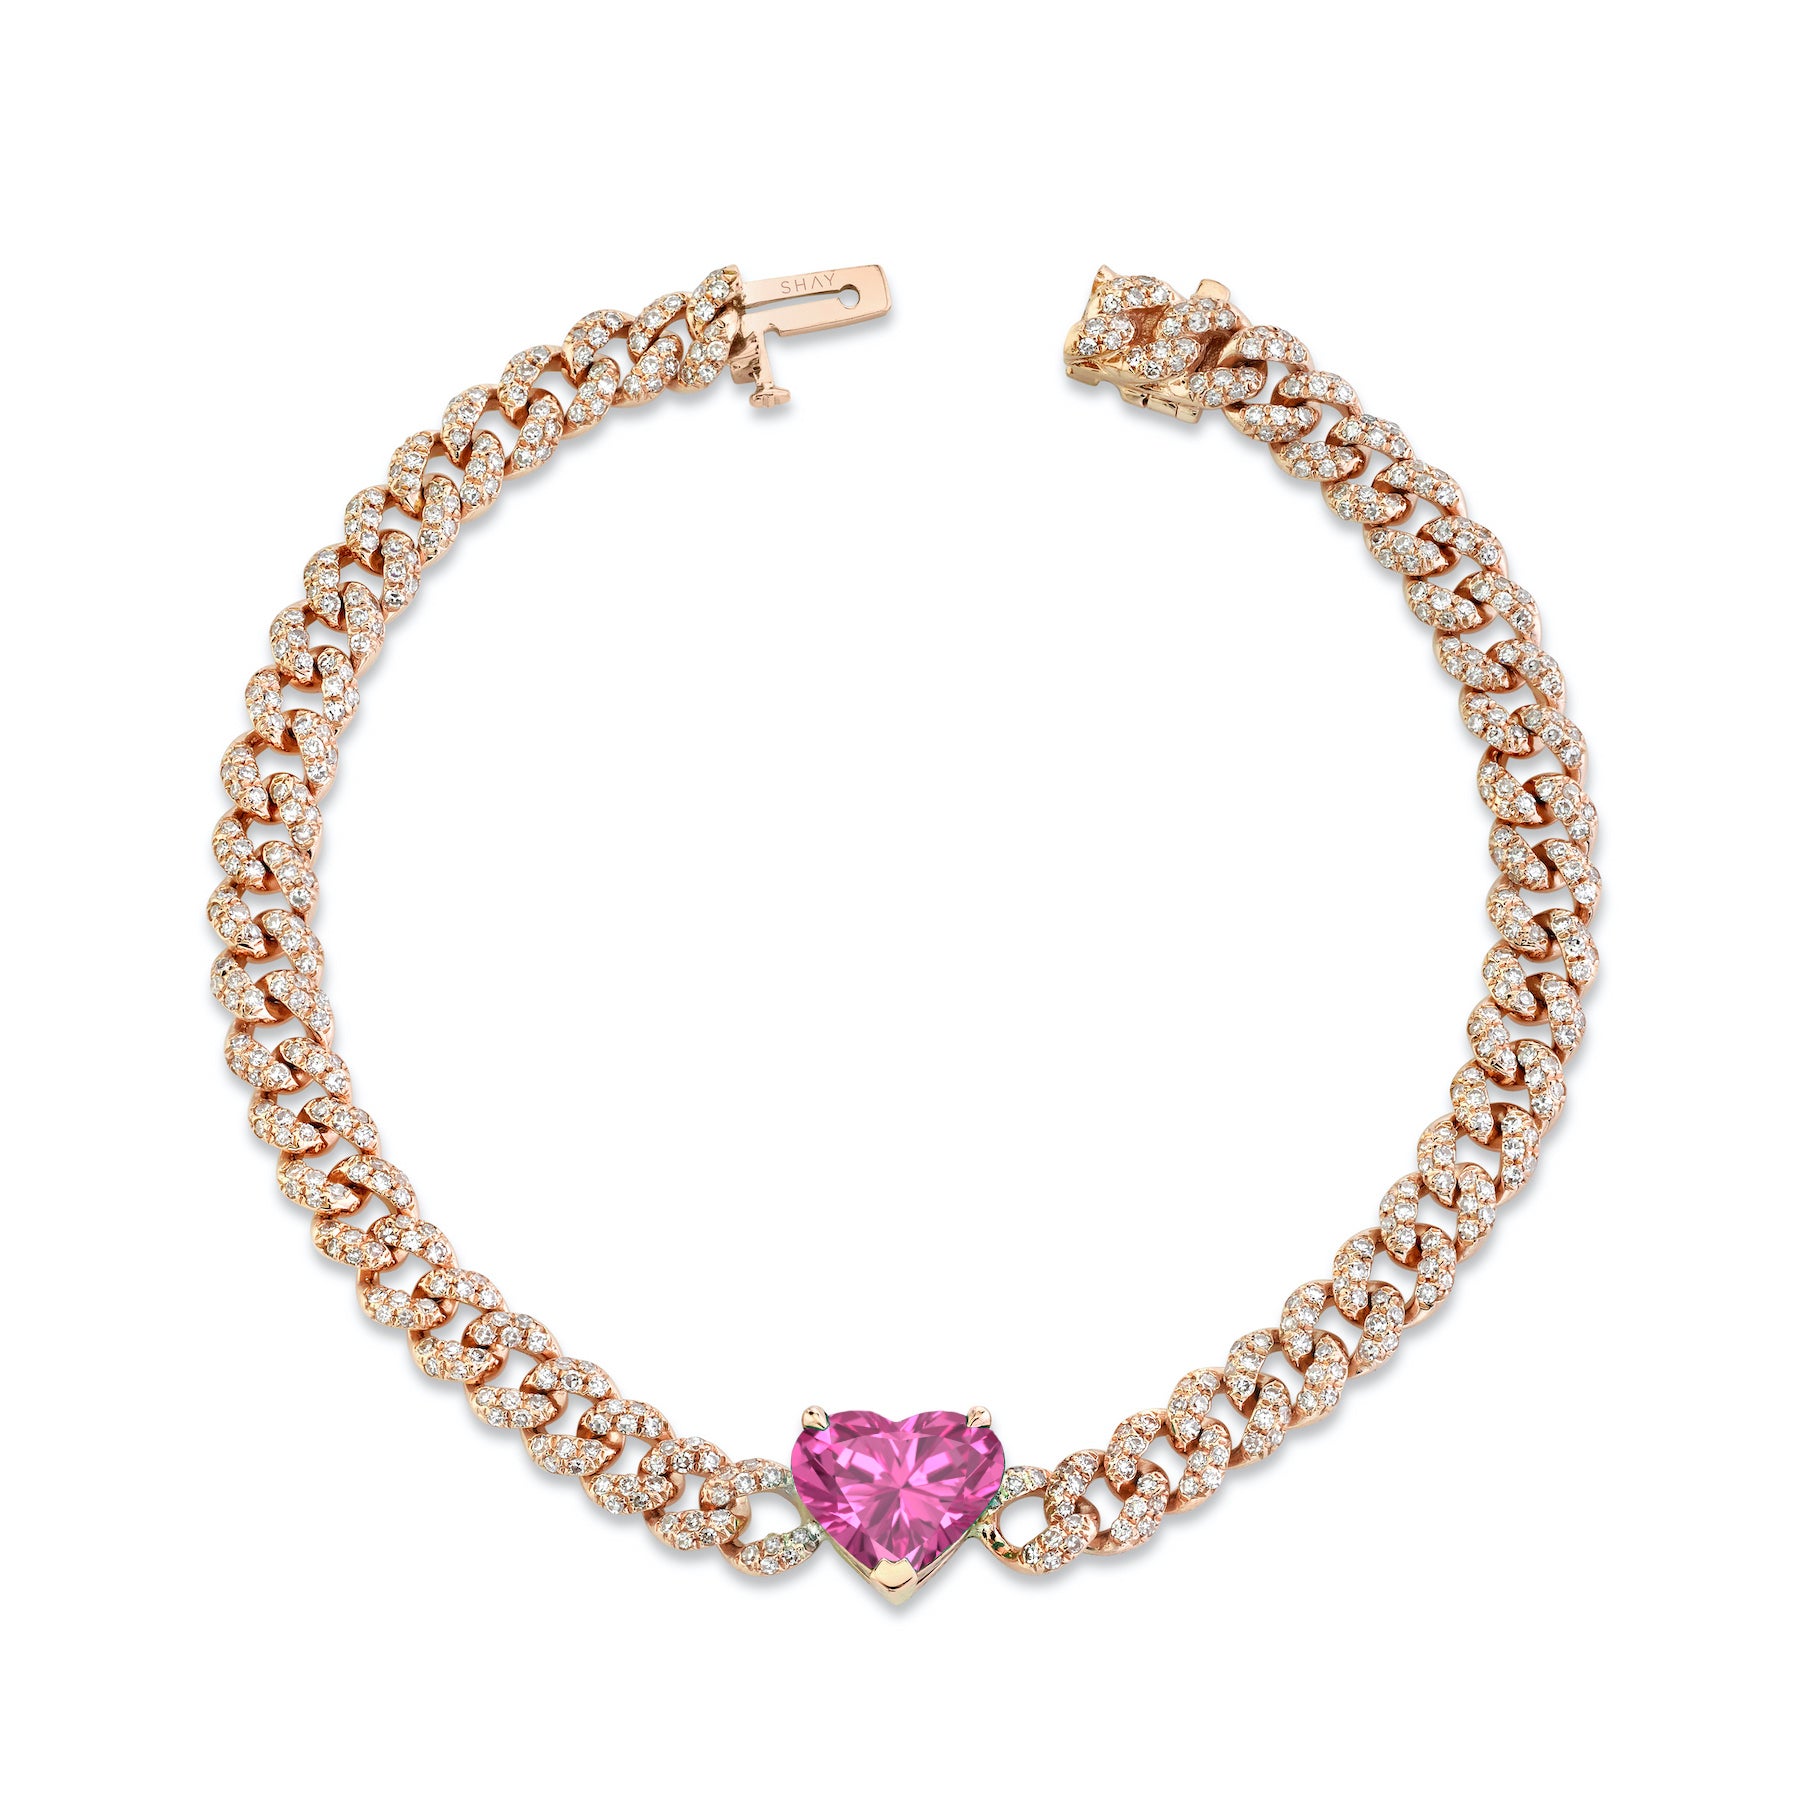 SHAY 18kt rose gold diamond and pearl bracelet